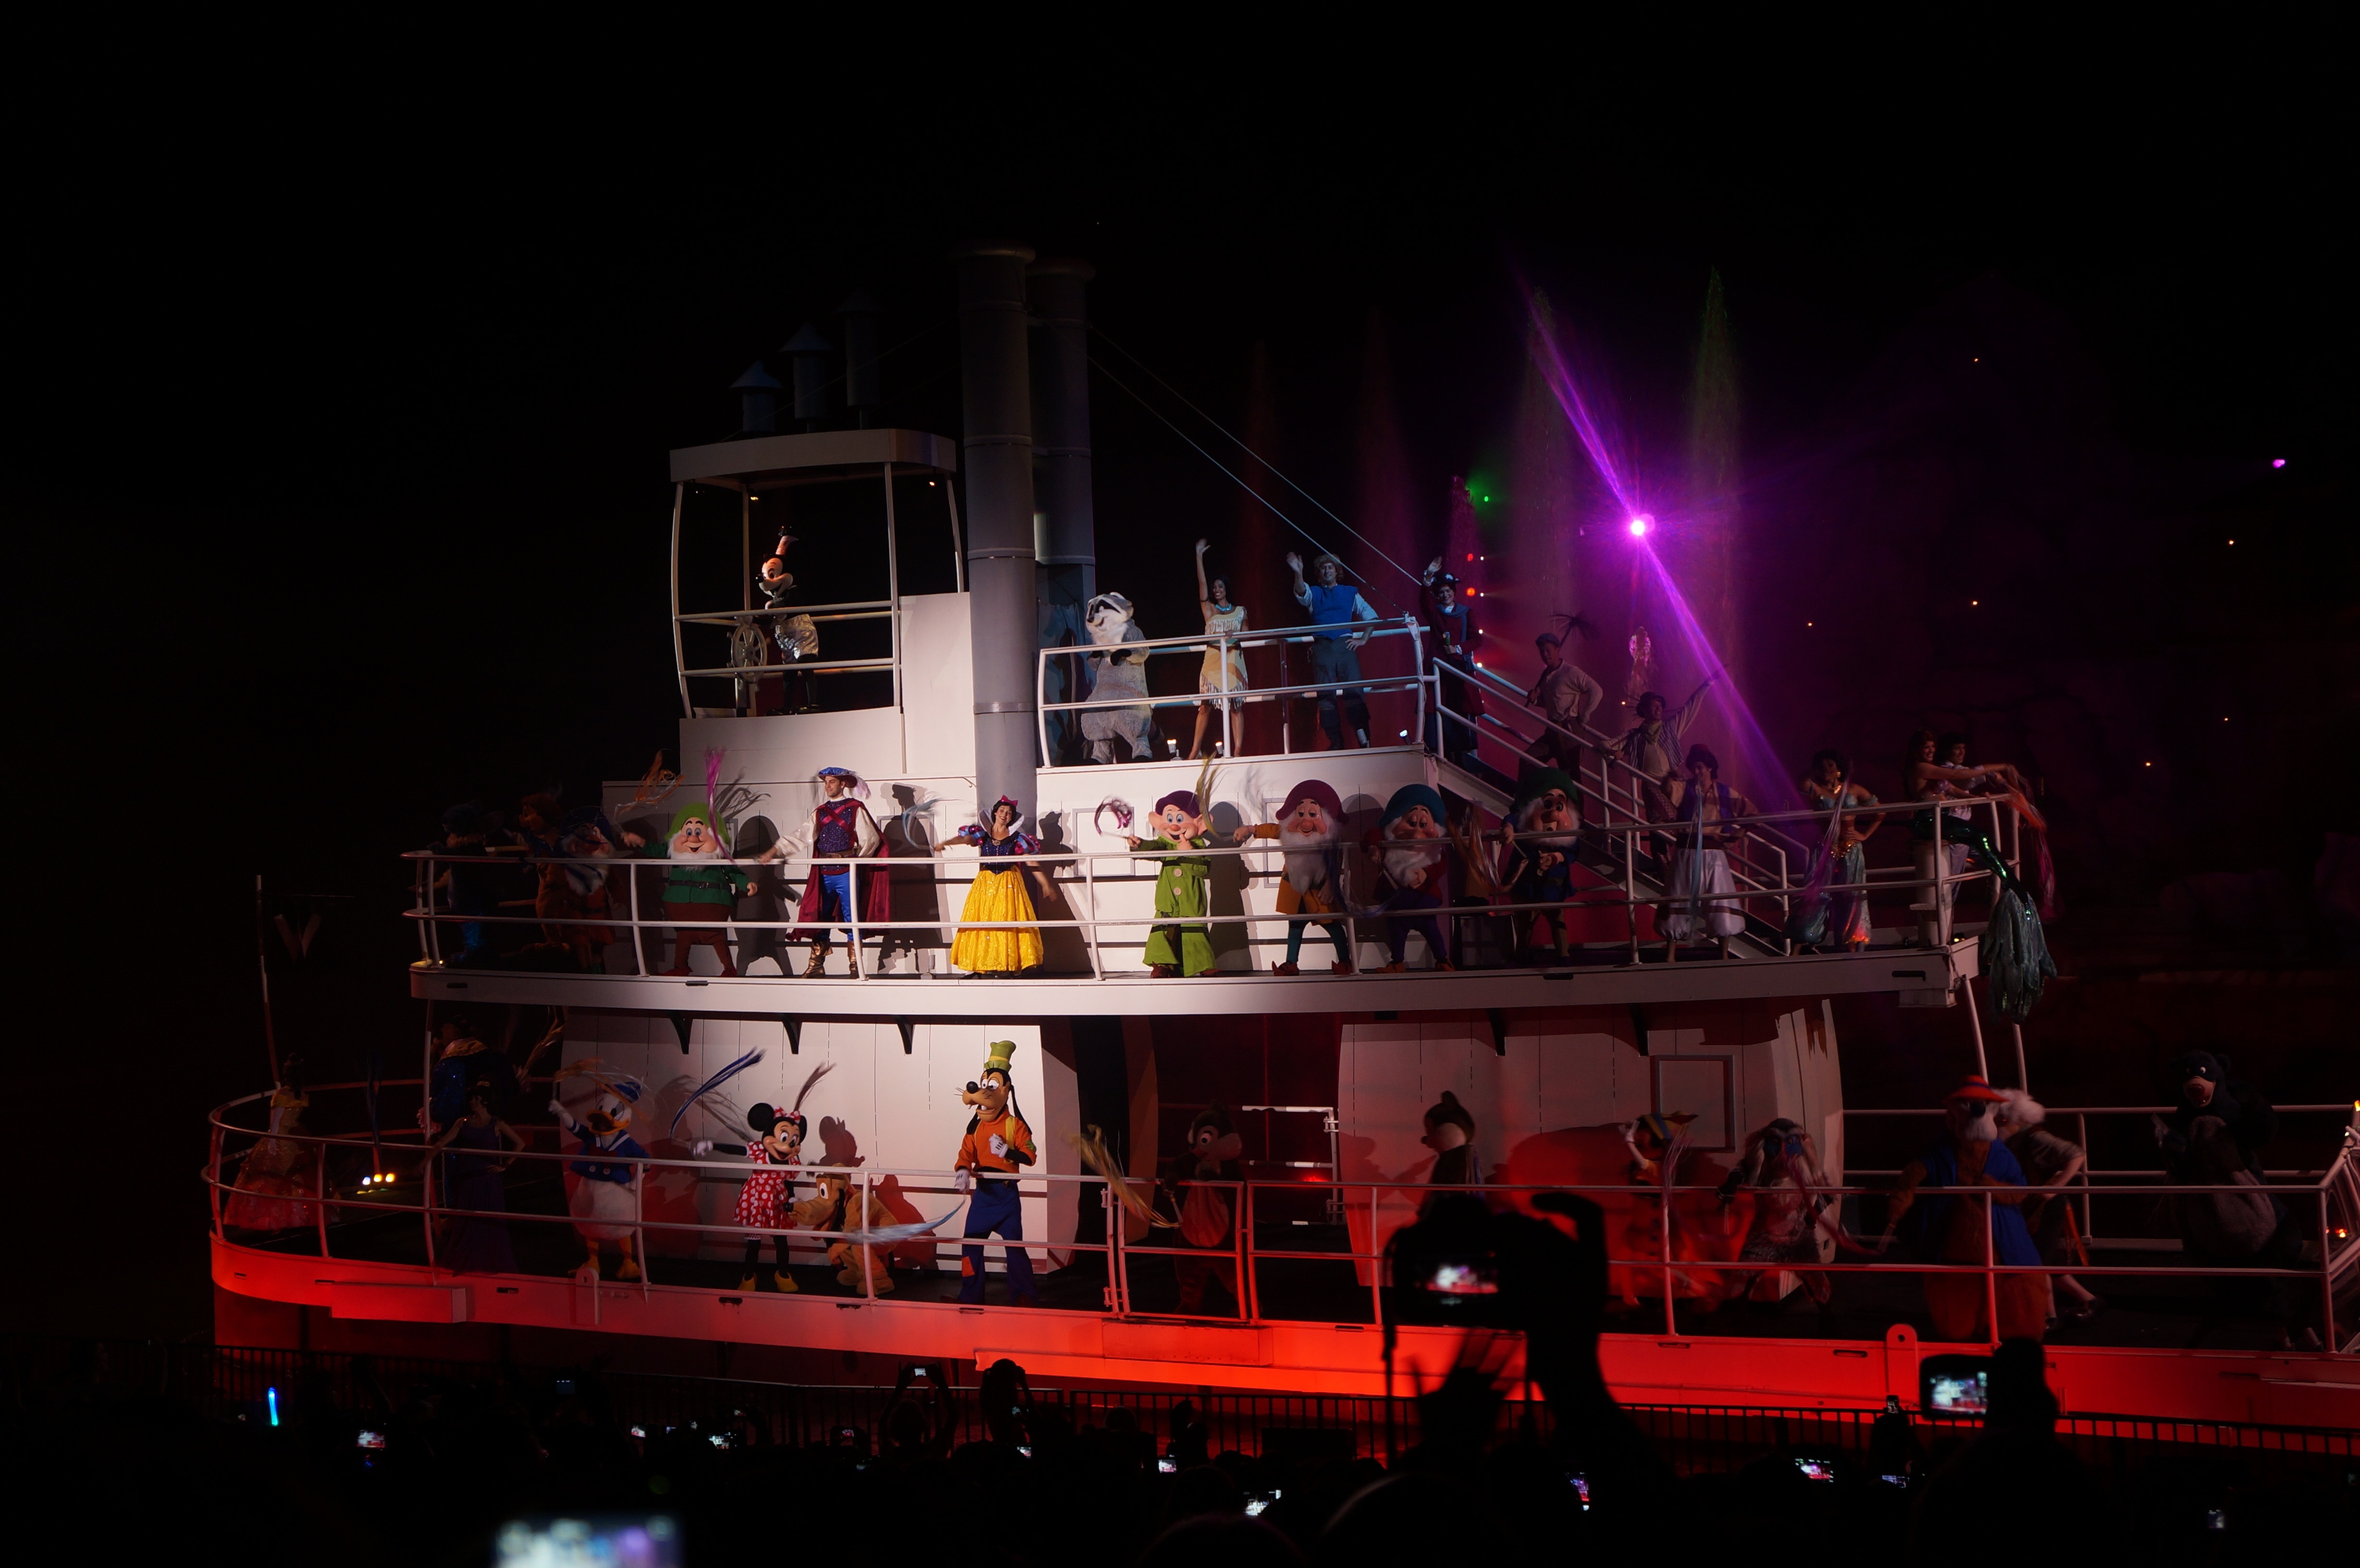 disney characters show on the boat